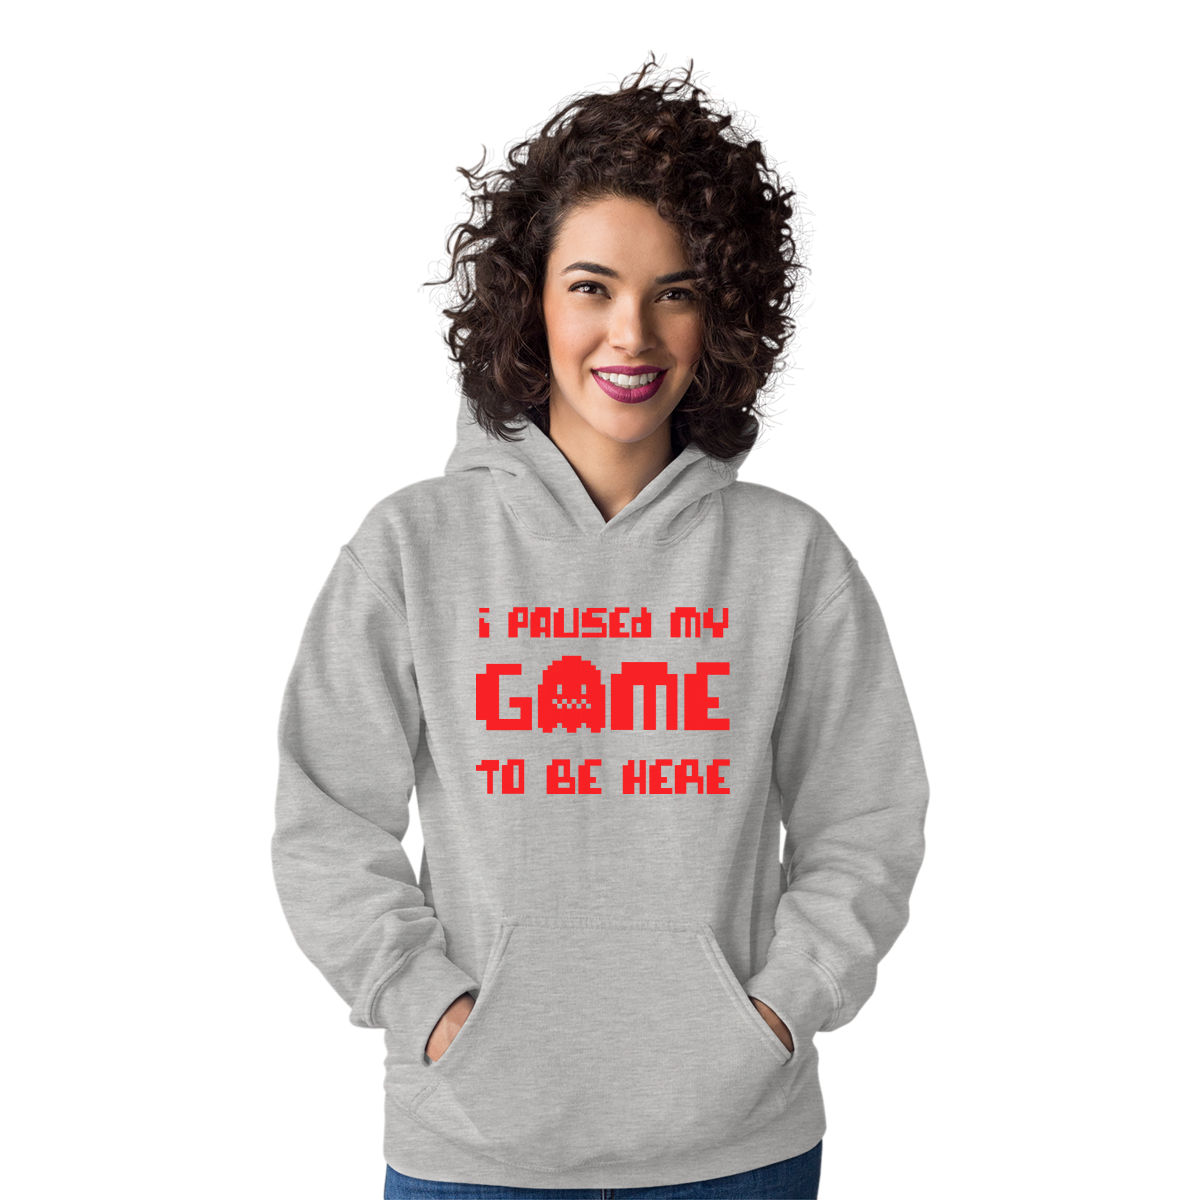 I Paused My Game To Be Here  Unisex Hoodie | Gray